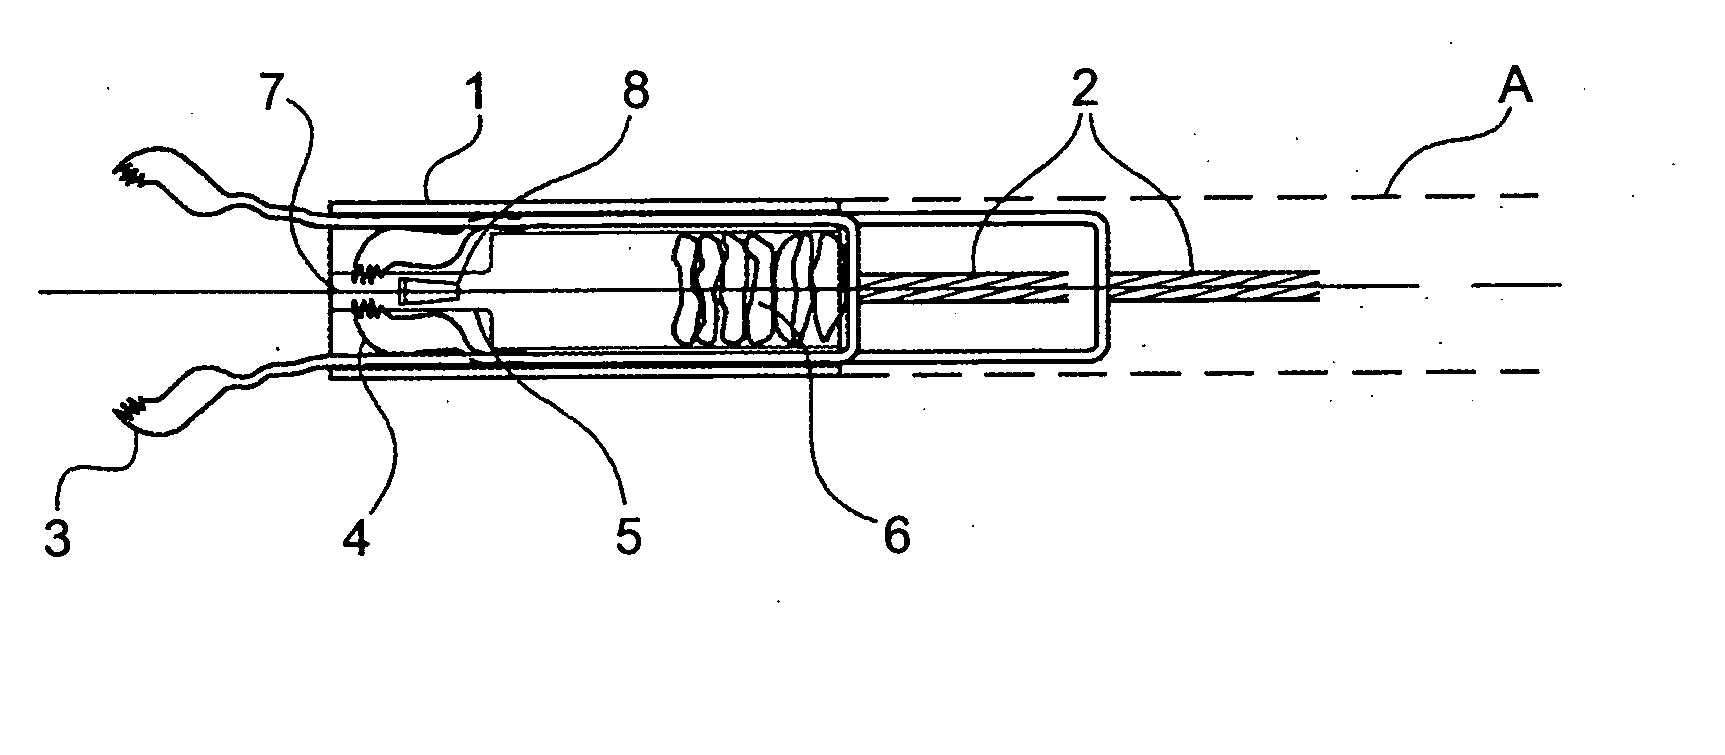 Apparatus for removable distal internal cassette for in situ fixation and specimen processing with serial collection and storage of biopsy specimens